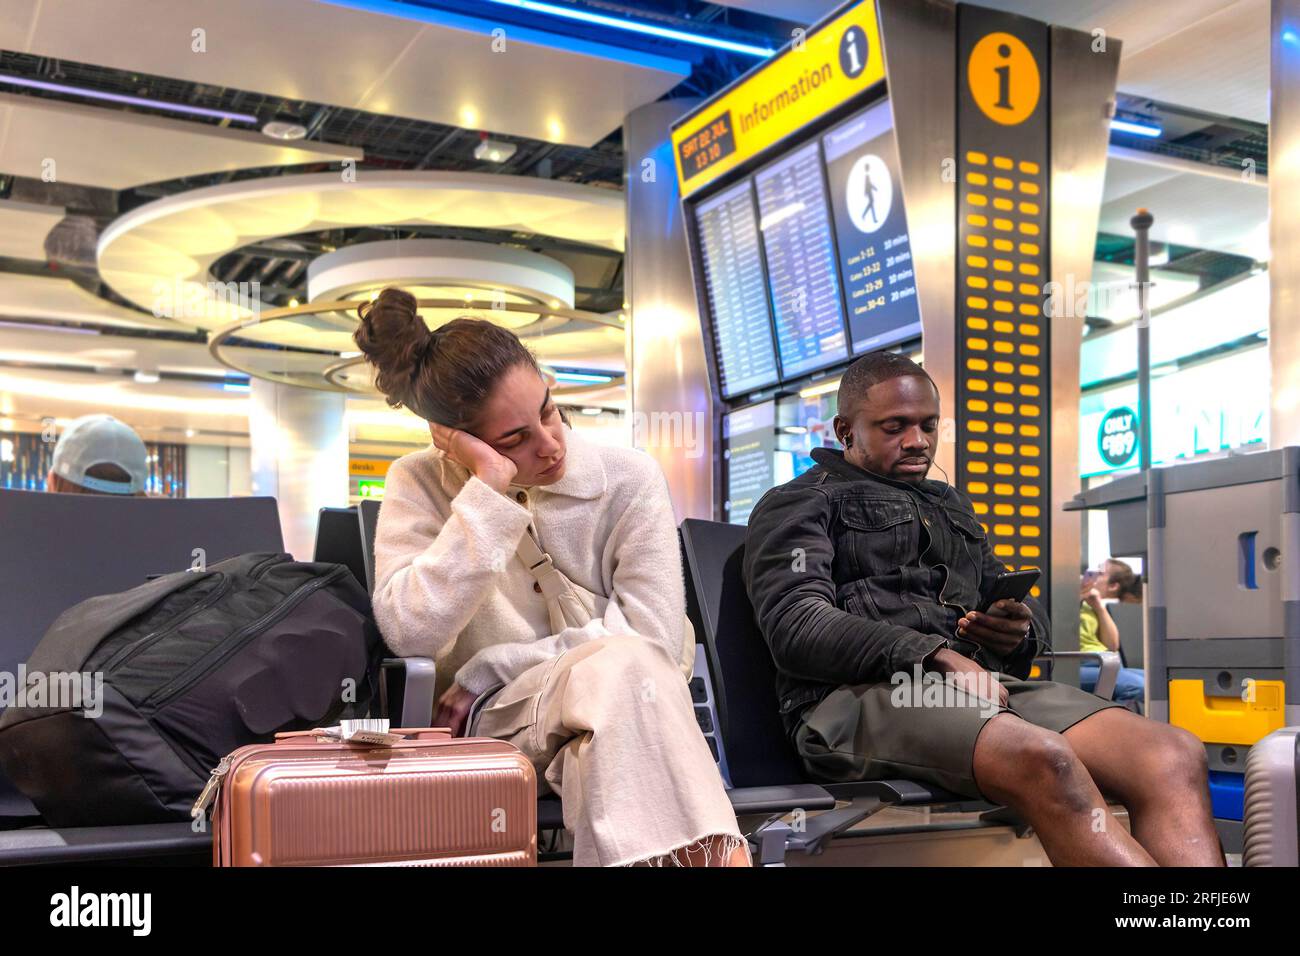 man and woman passenger waiting for flight at departures heathrow airport london uk LHR travel disruption and flight delays concept Stock Photo